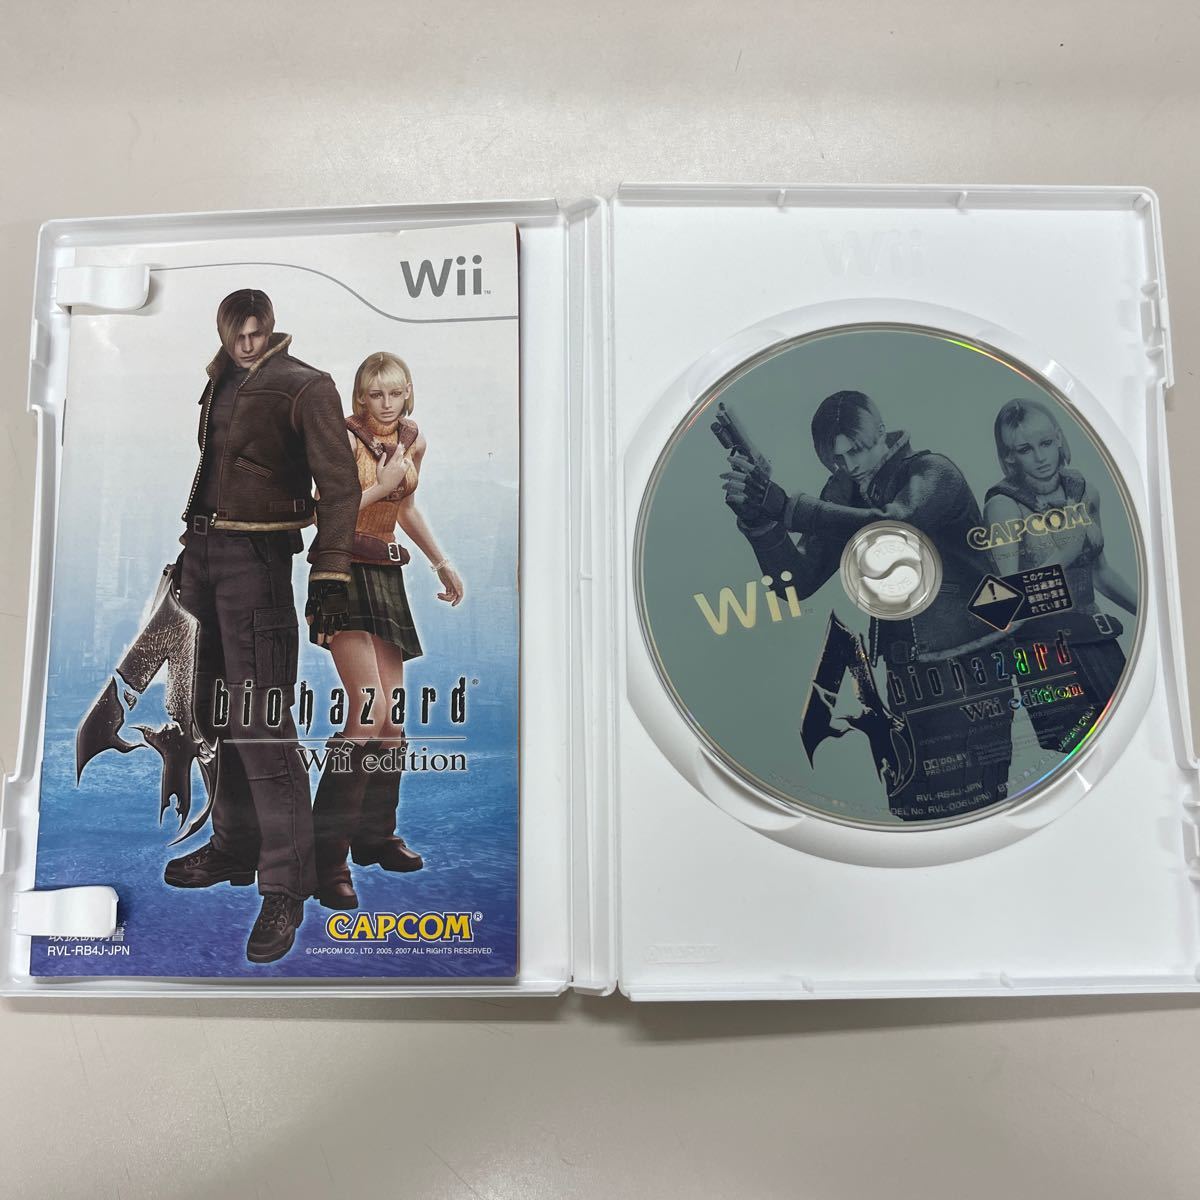 【Wii】 バイオハザード4 Wii edition